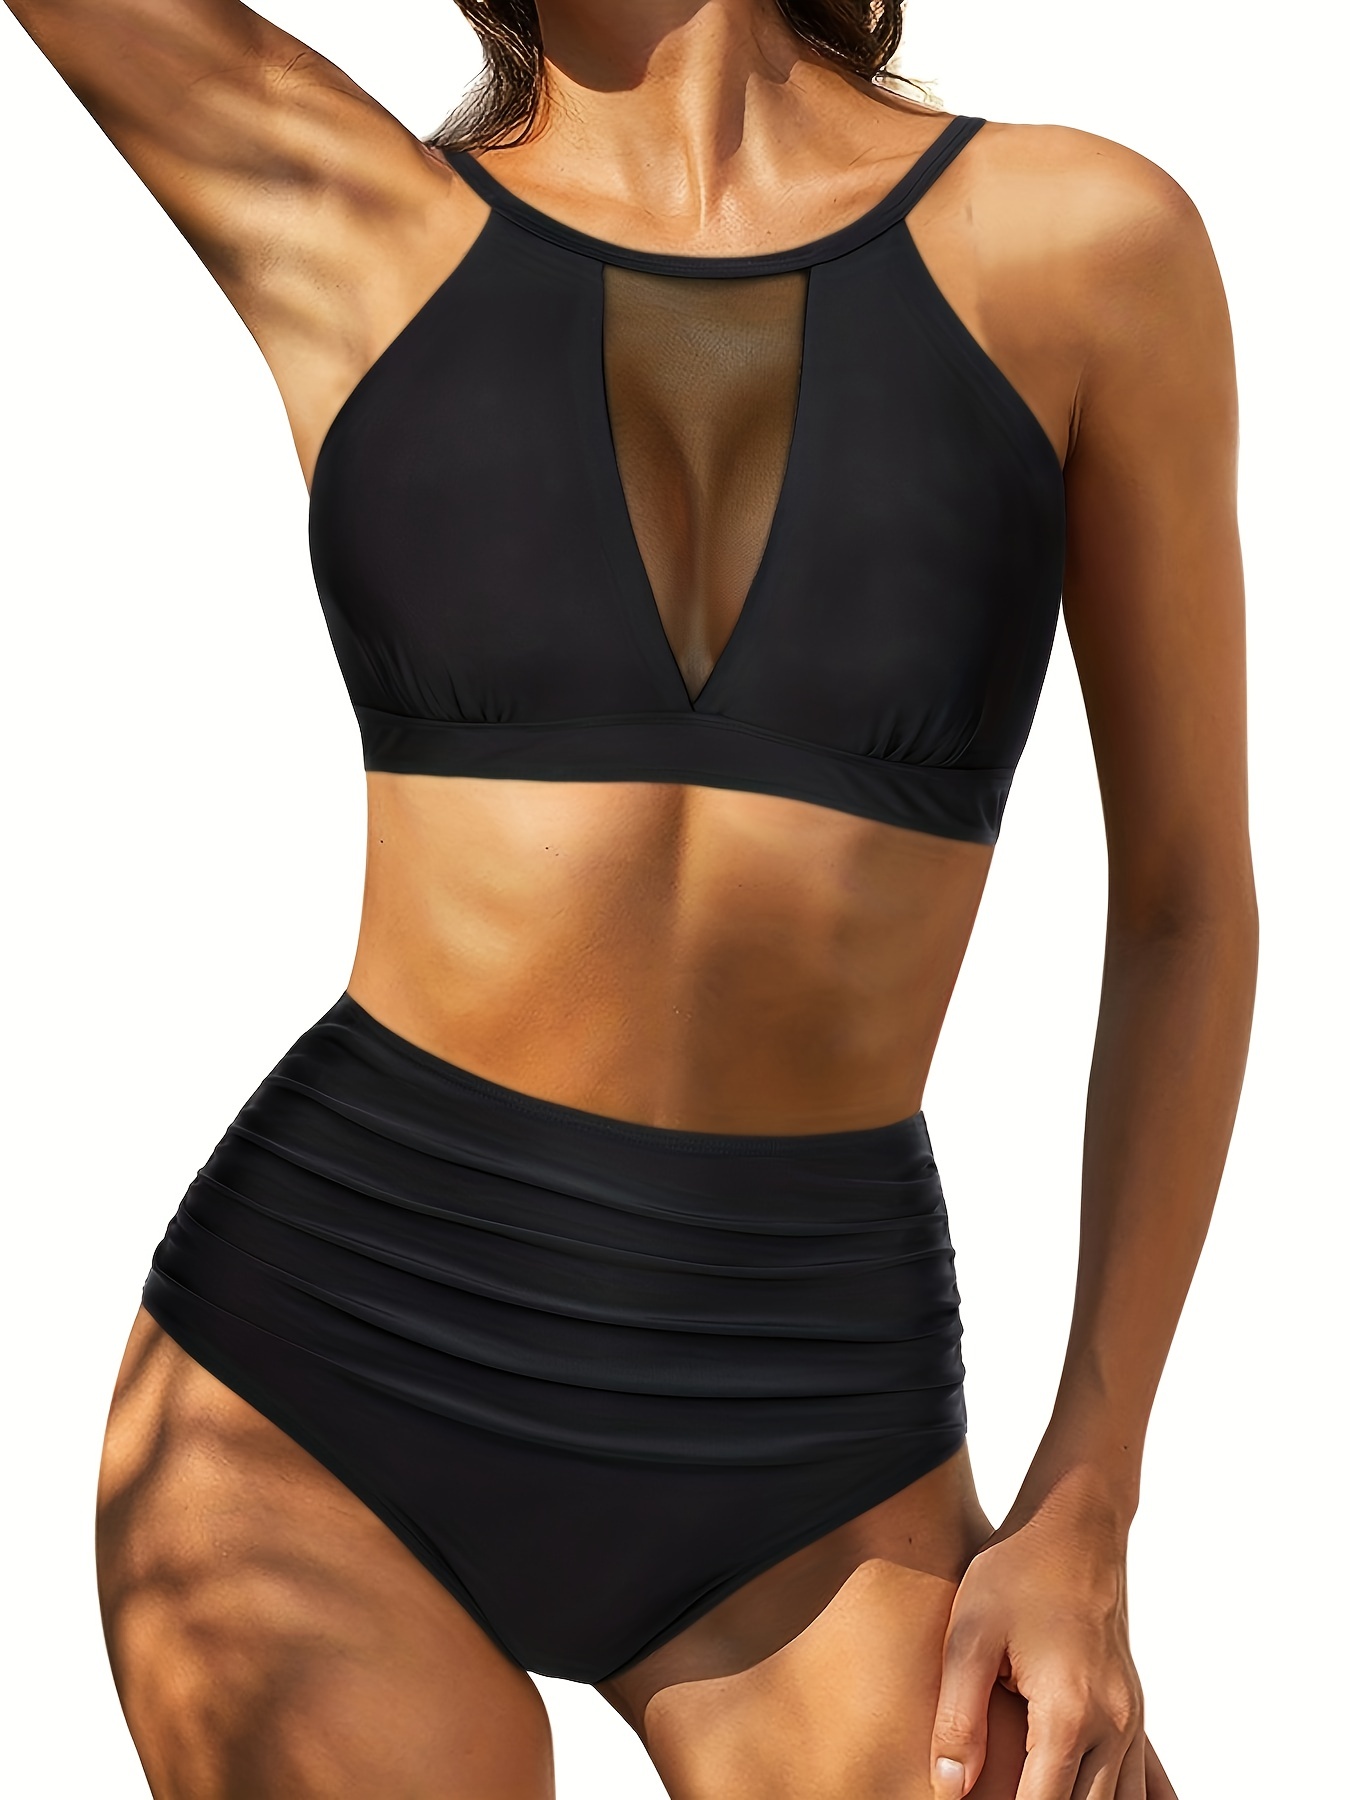 Women Two Piece Swimsuits Sports Bra Top Bathing Suits Mesh